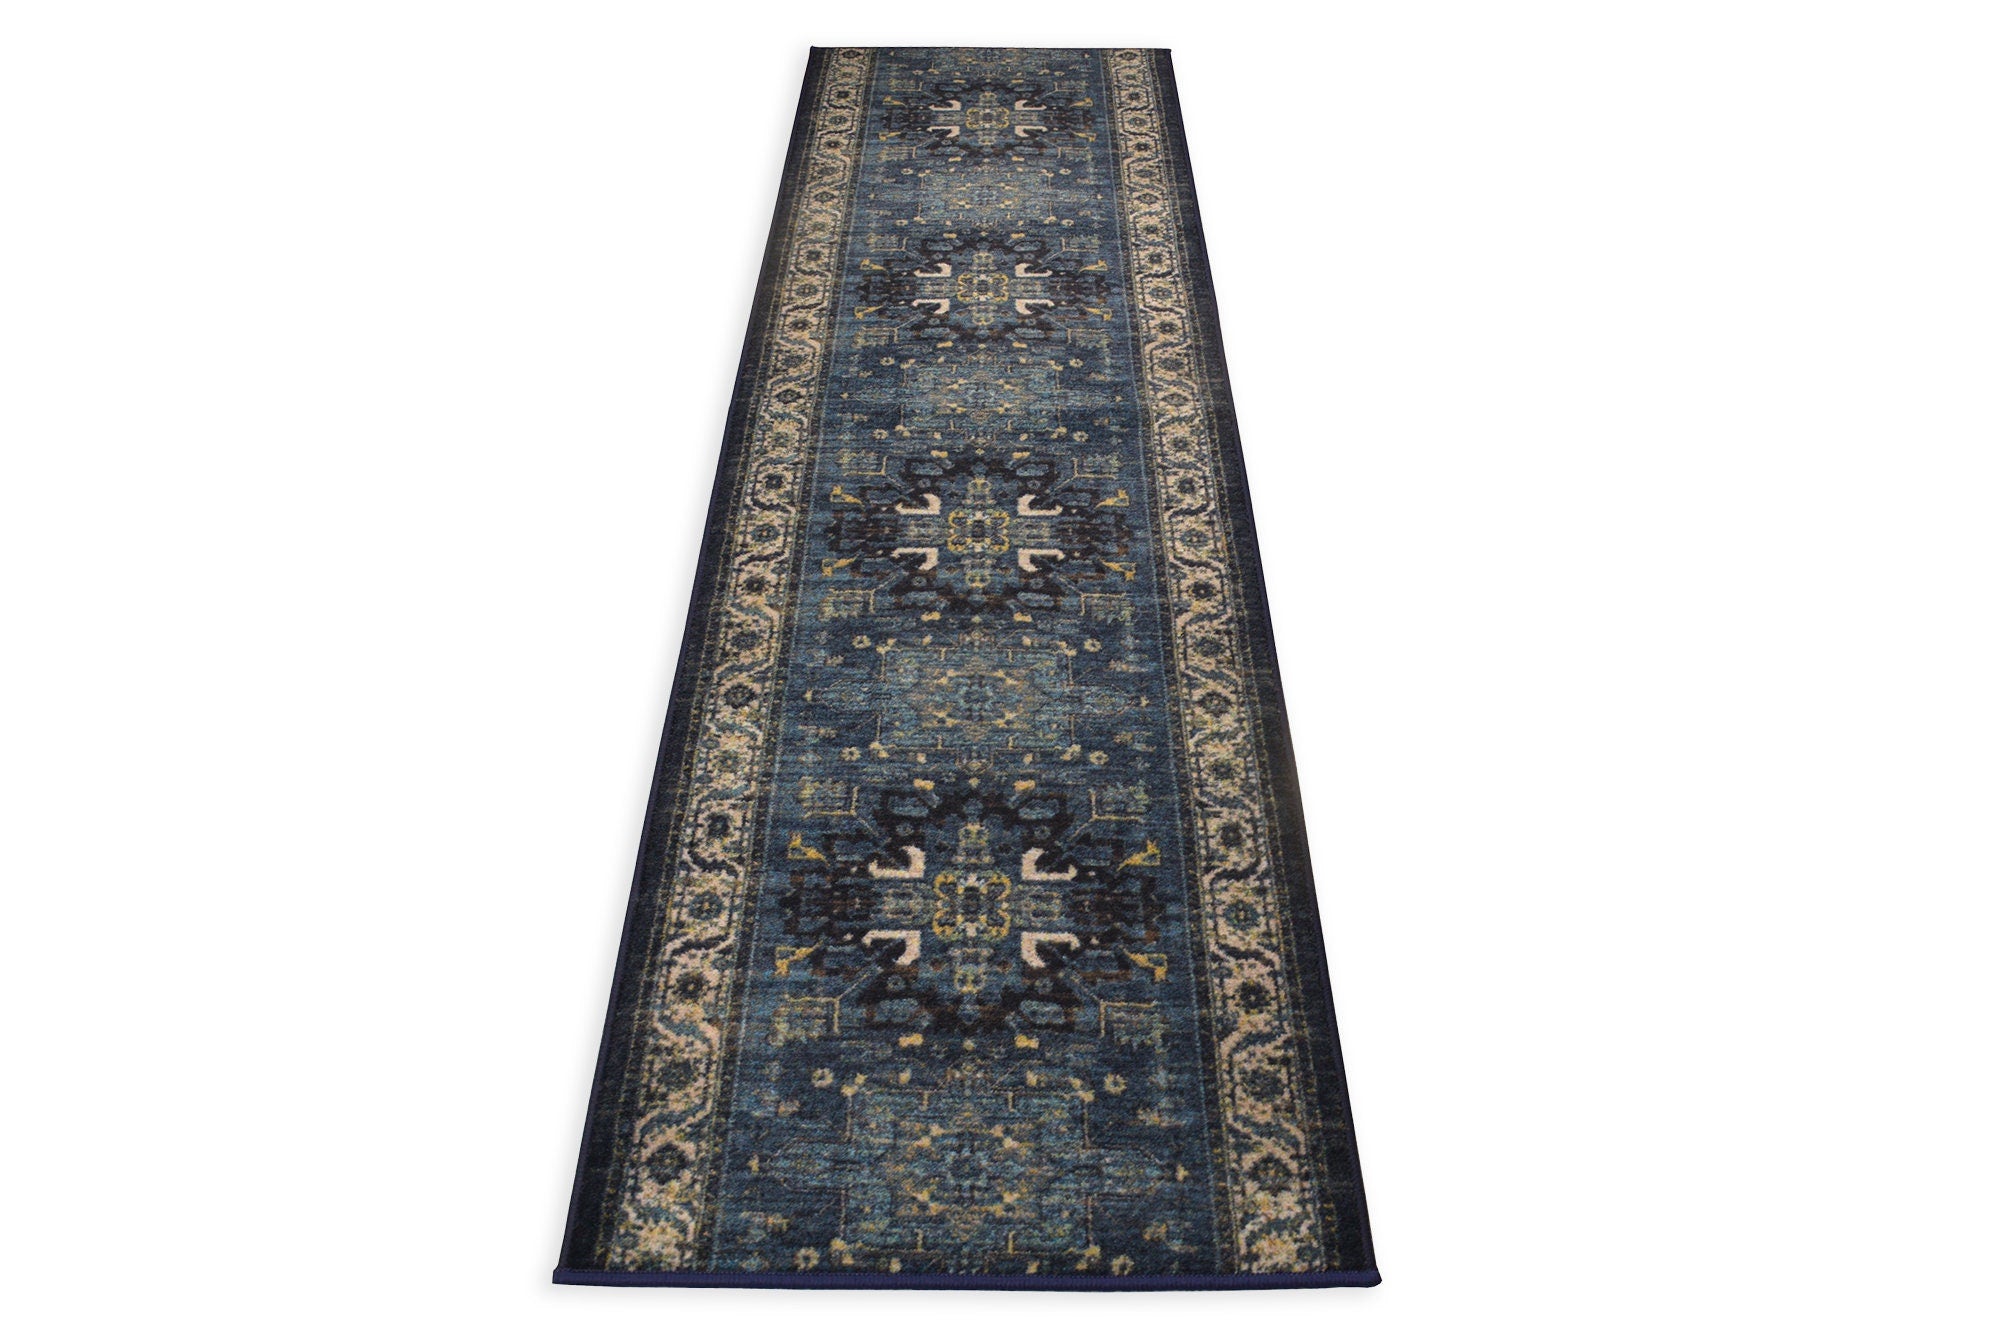 Custom Size Runner Rug Antique Persian Medallion Navy Blue Natural Cotton Backing Pick Your Own Size By Up to 50 Ft, Width 26" or 35"